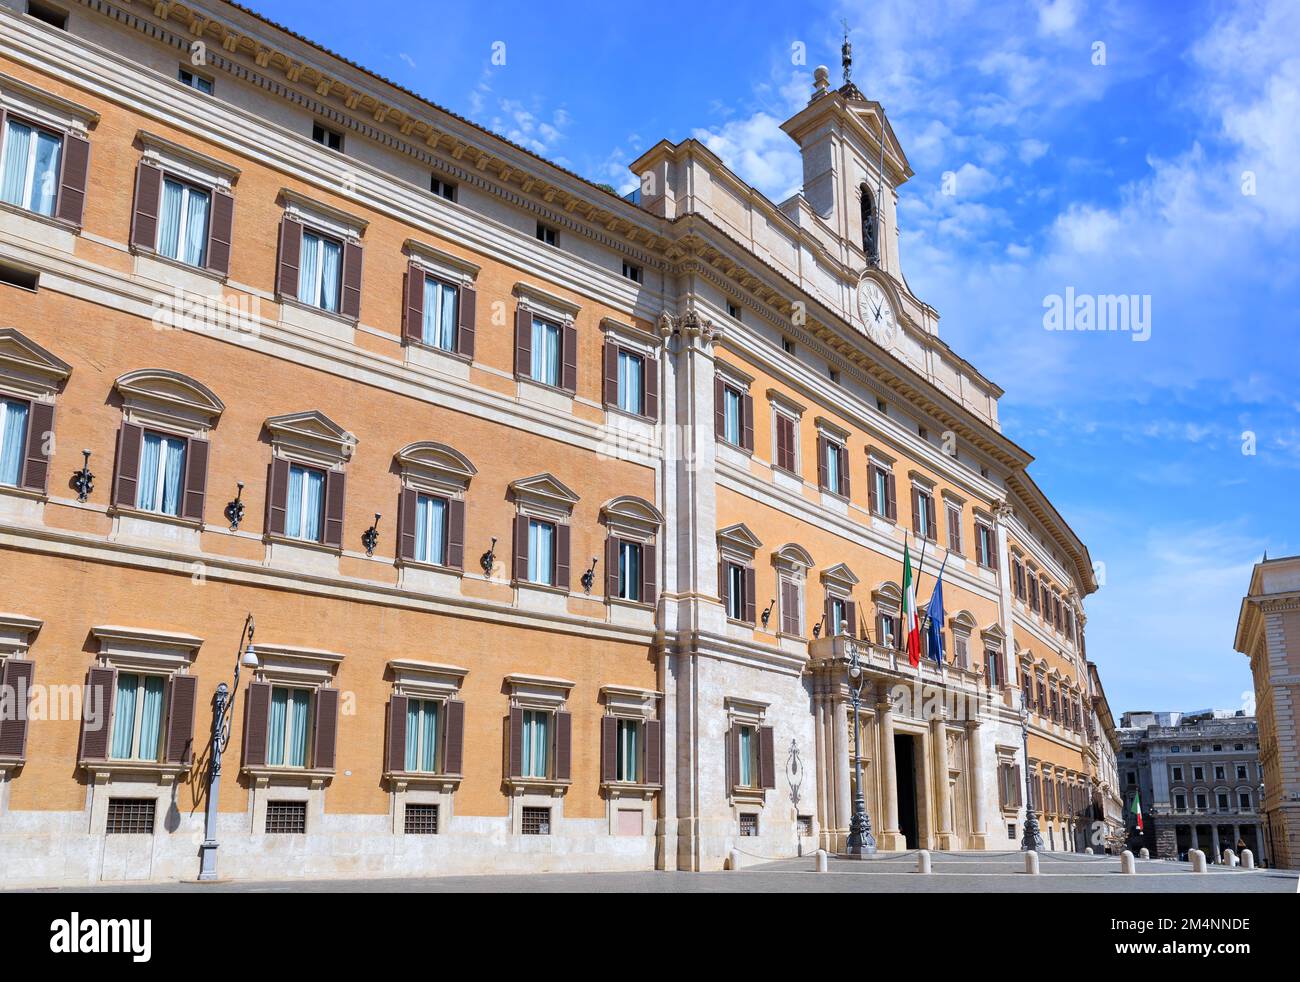 Facade of Montecitorio Palace (Palazzo Montecitorio) in Rome: it's the seat of the Chamber of Deputies, one of Italy’s two houses of parliament. Stock Photo